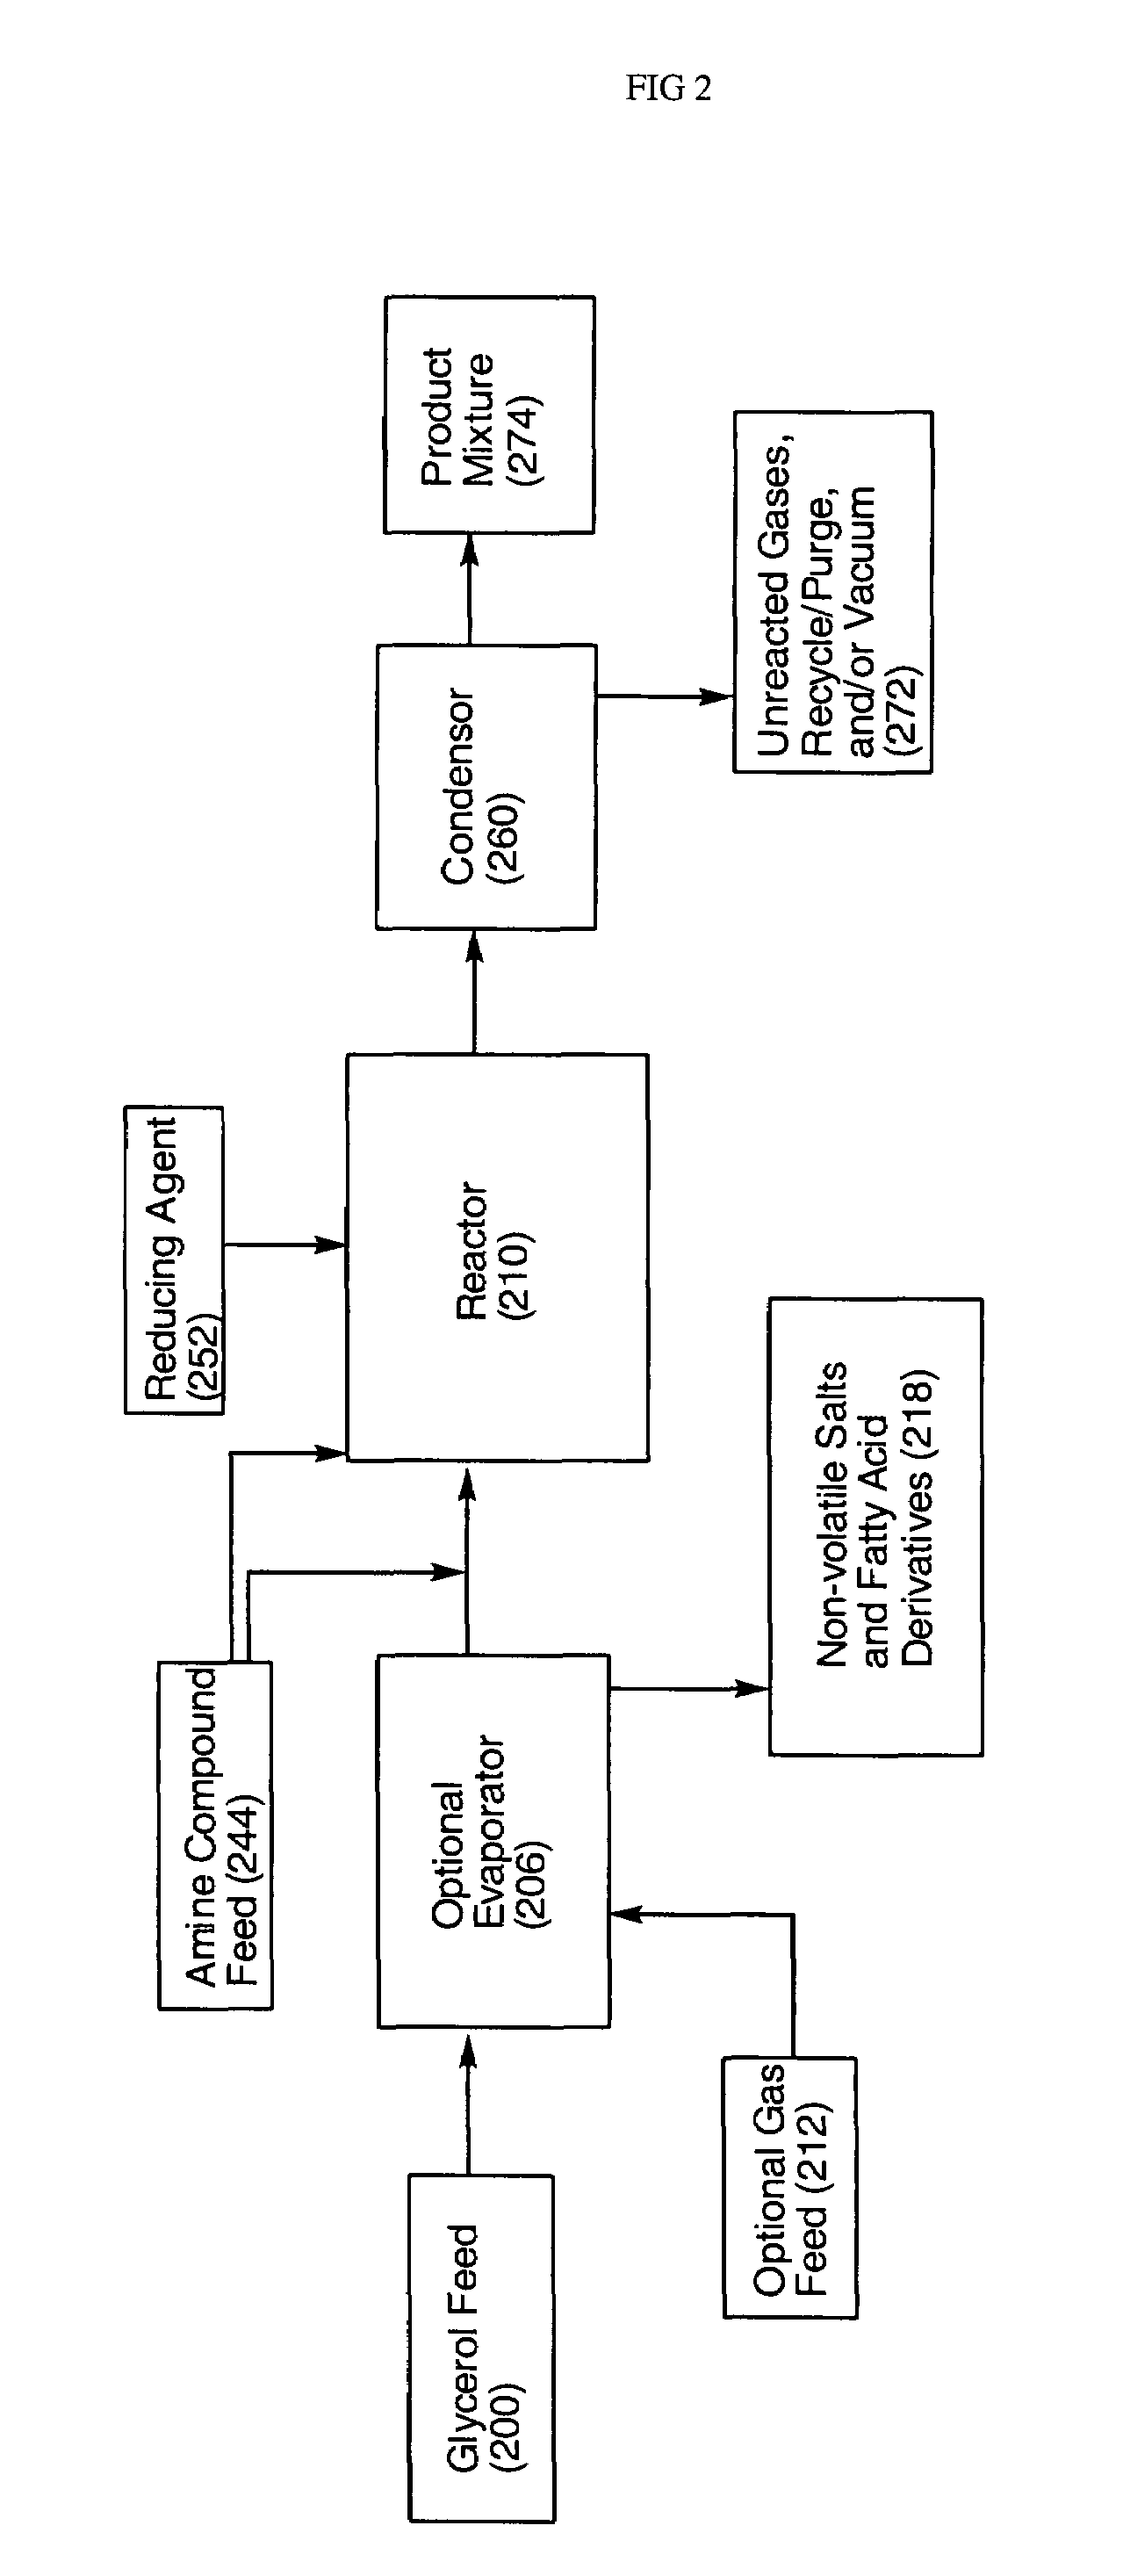 Process for the conversion of glycerol to propylene glycol and amino alcohols